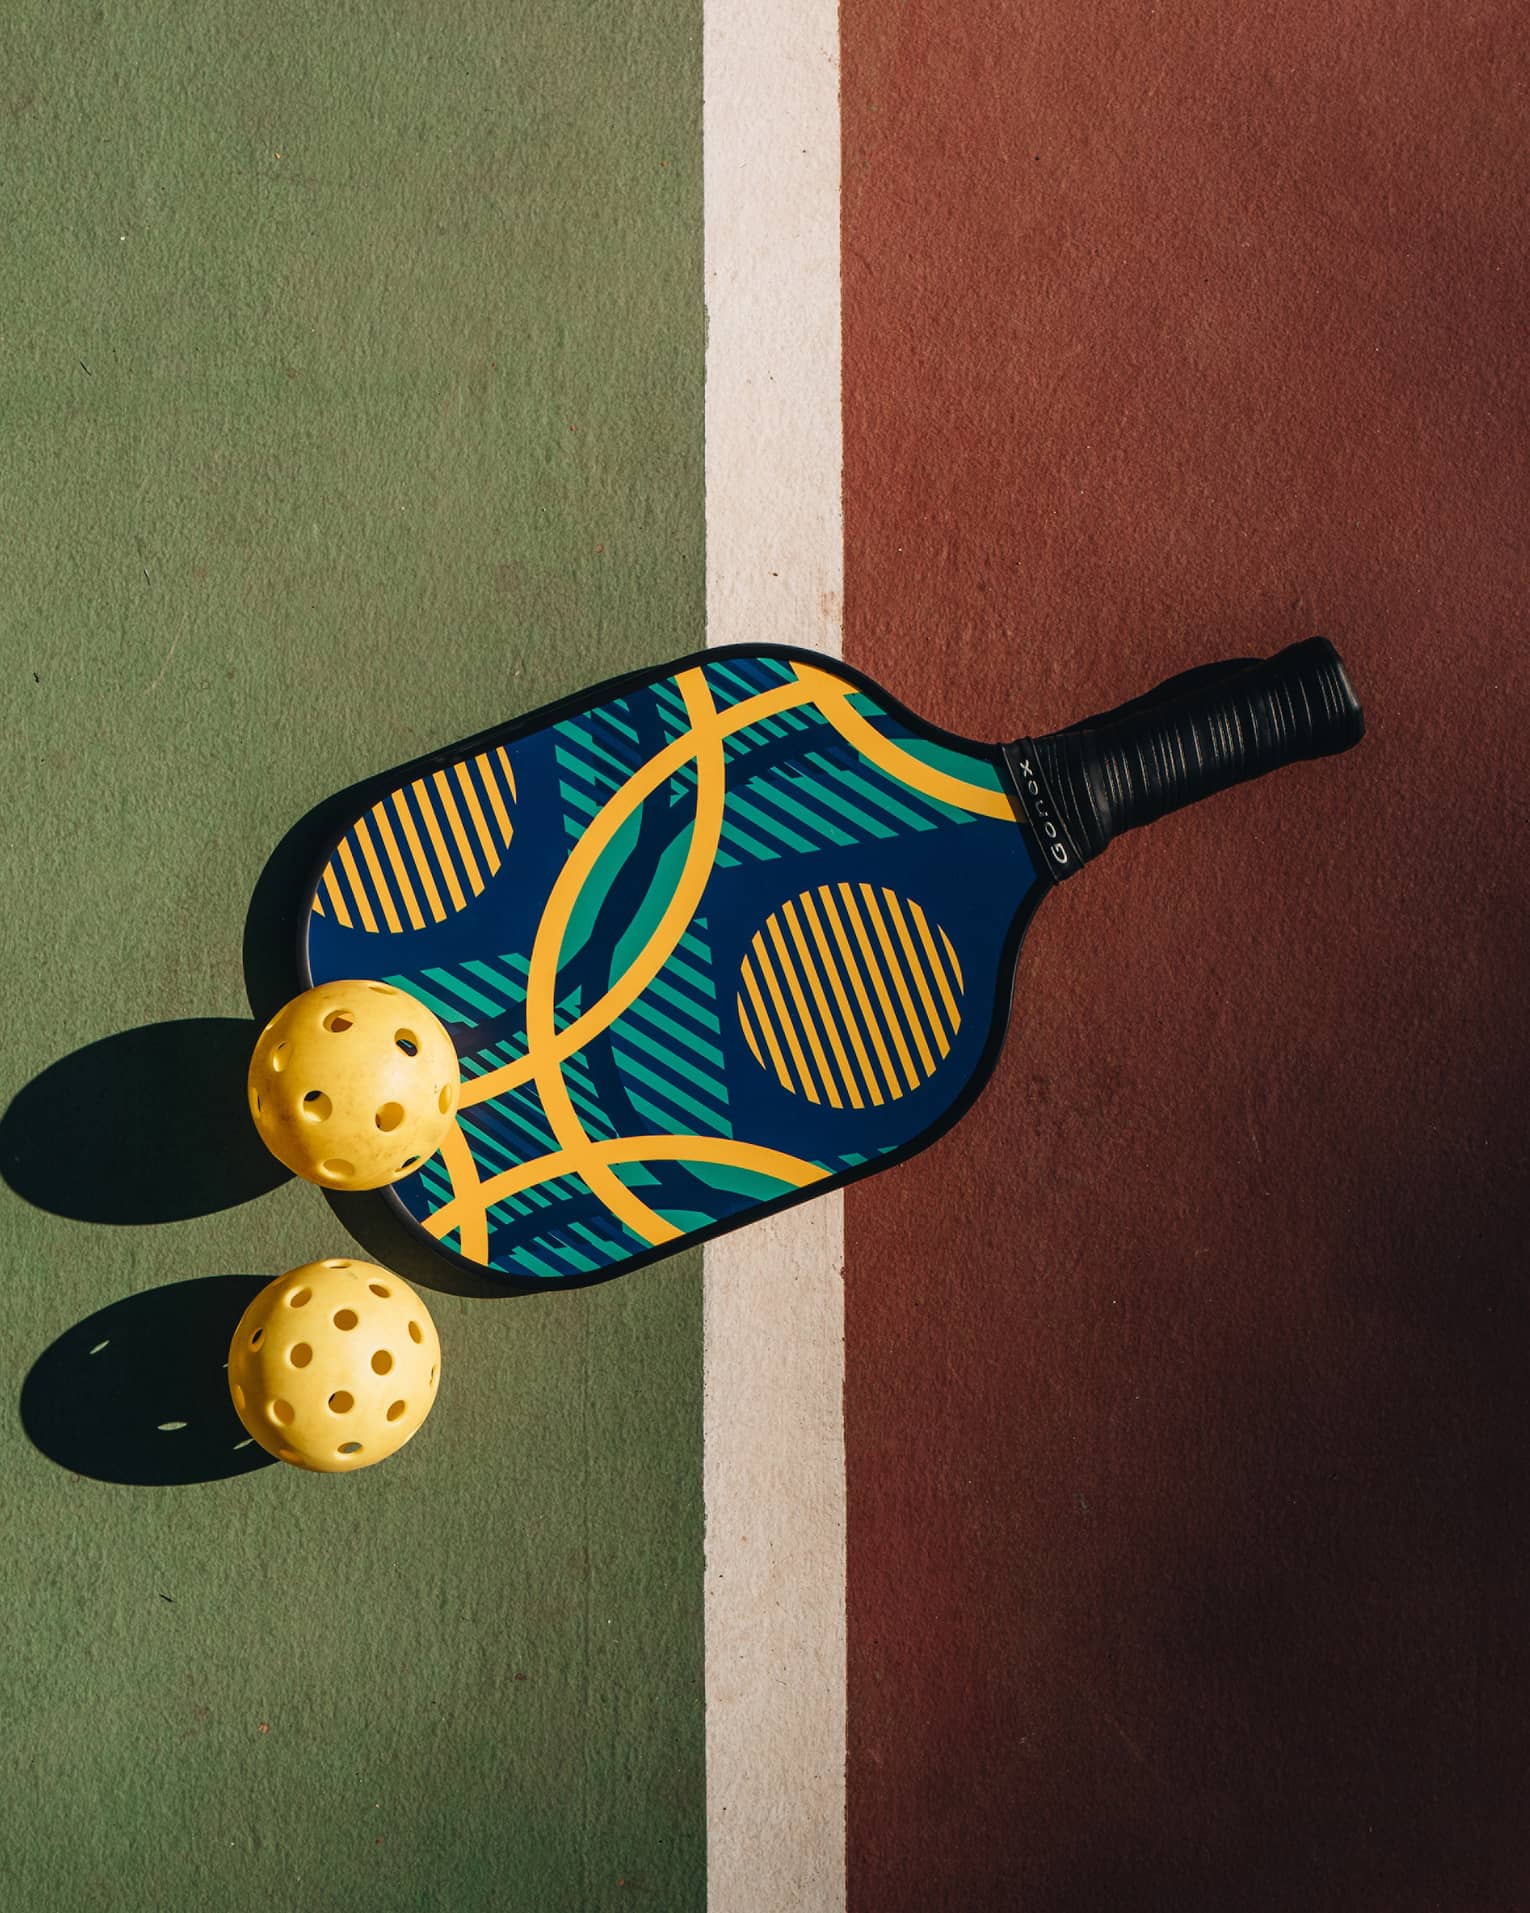 A colourful pickleball racquet and two yellow pickleballs cast shadows upon a green and red court with a white dividing line.